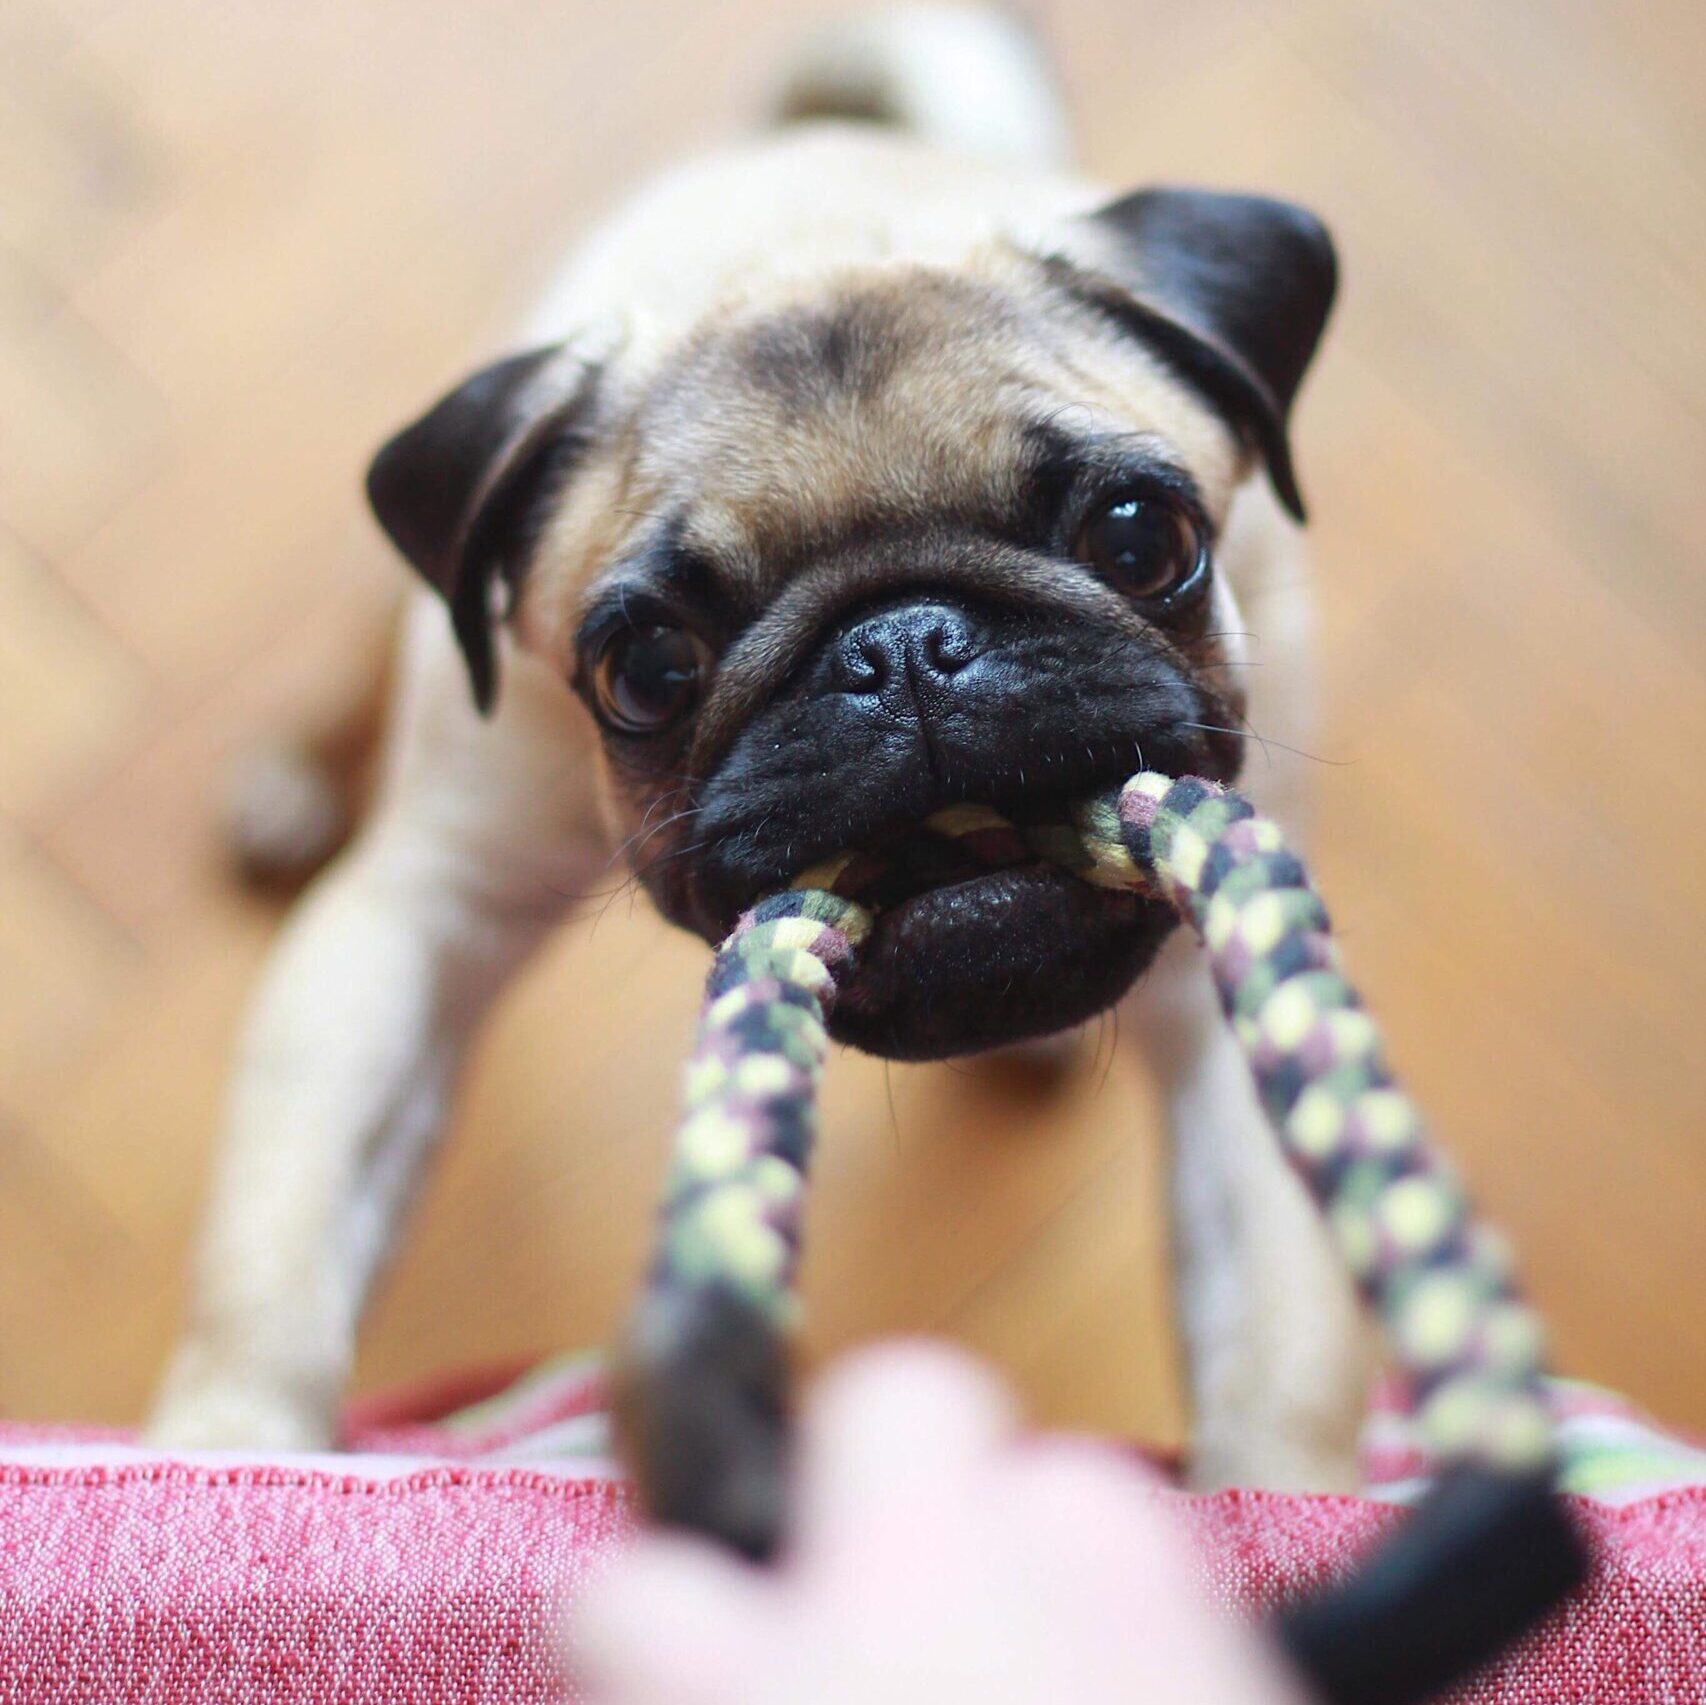 a pug dog playing tug with a rope toy.